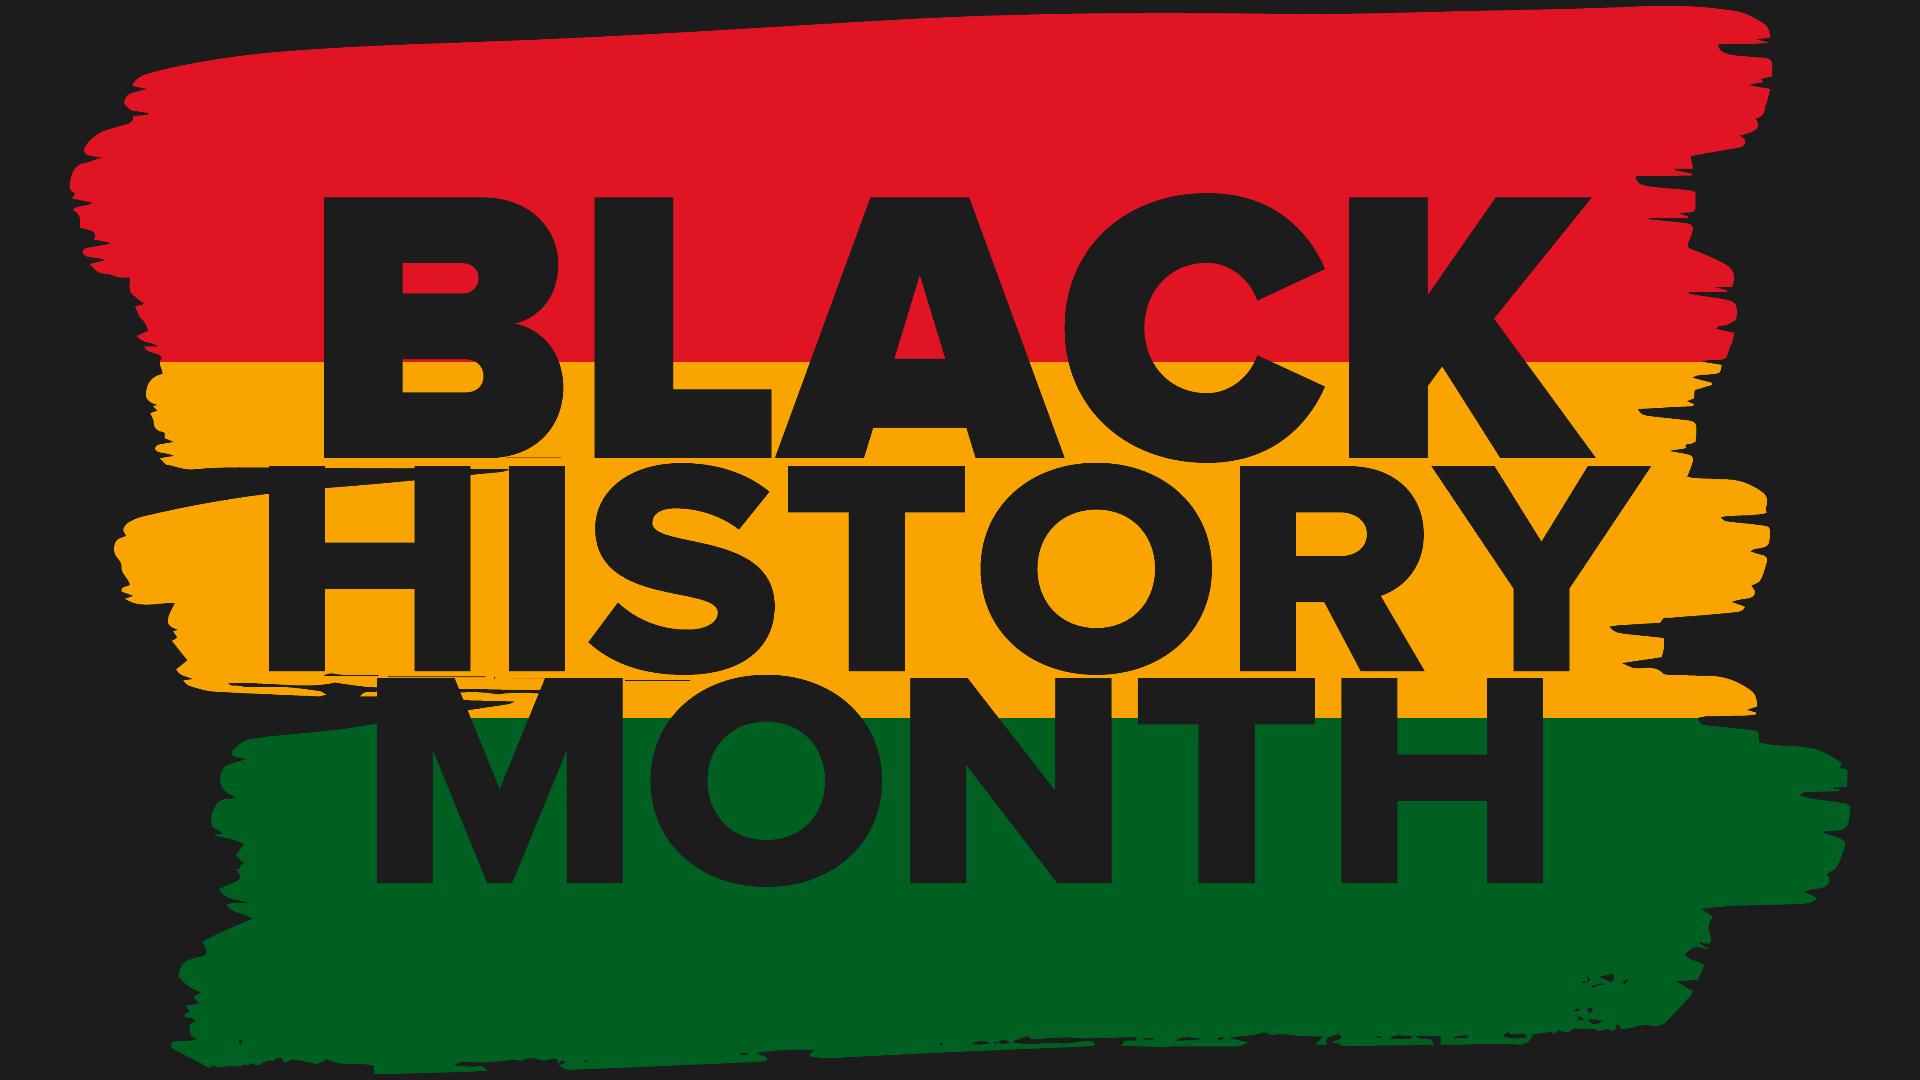 Several organizations are putting on virtual events to commemorate Black History Month. Here's a rundown of what's going on.